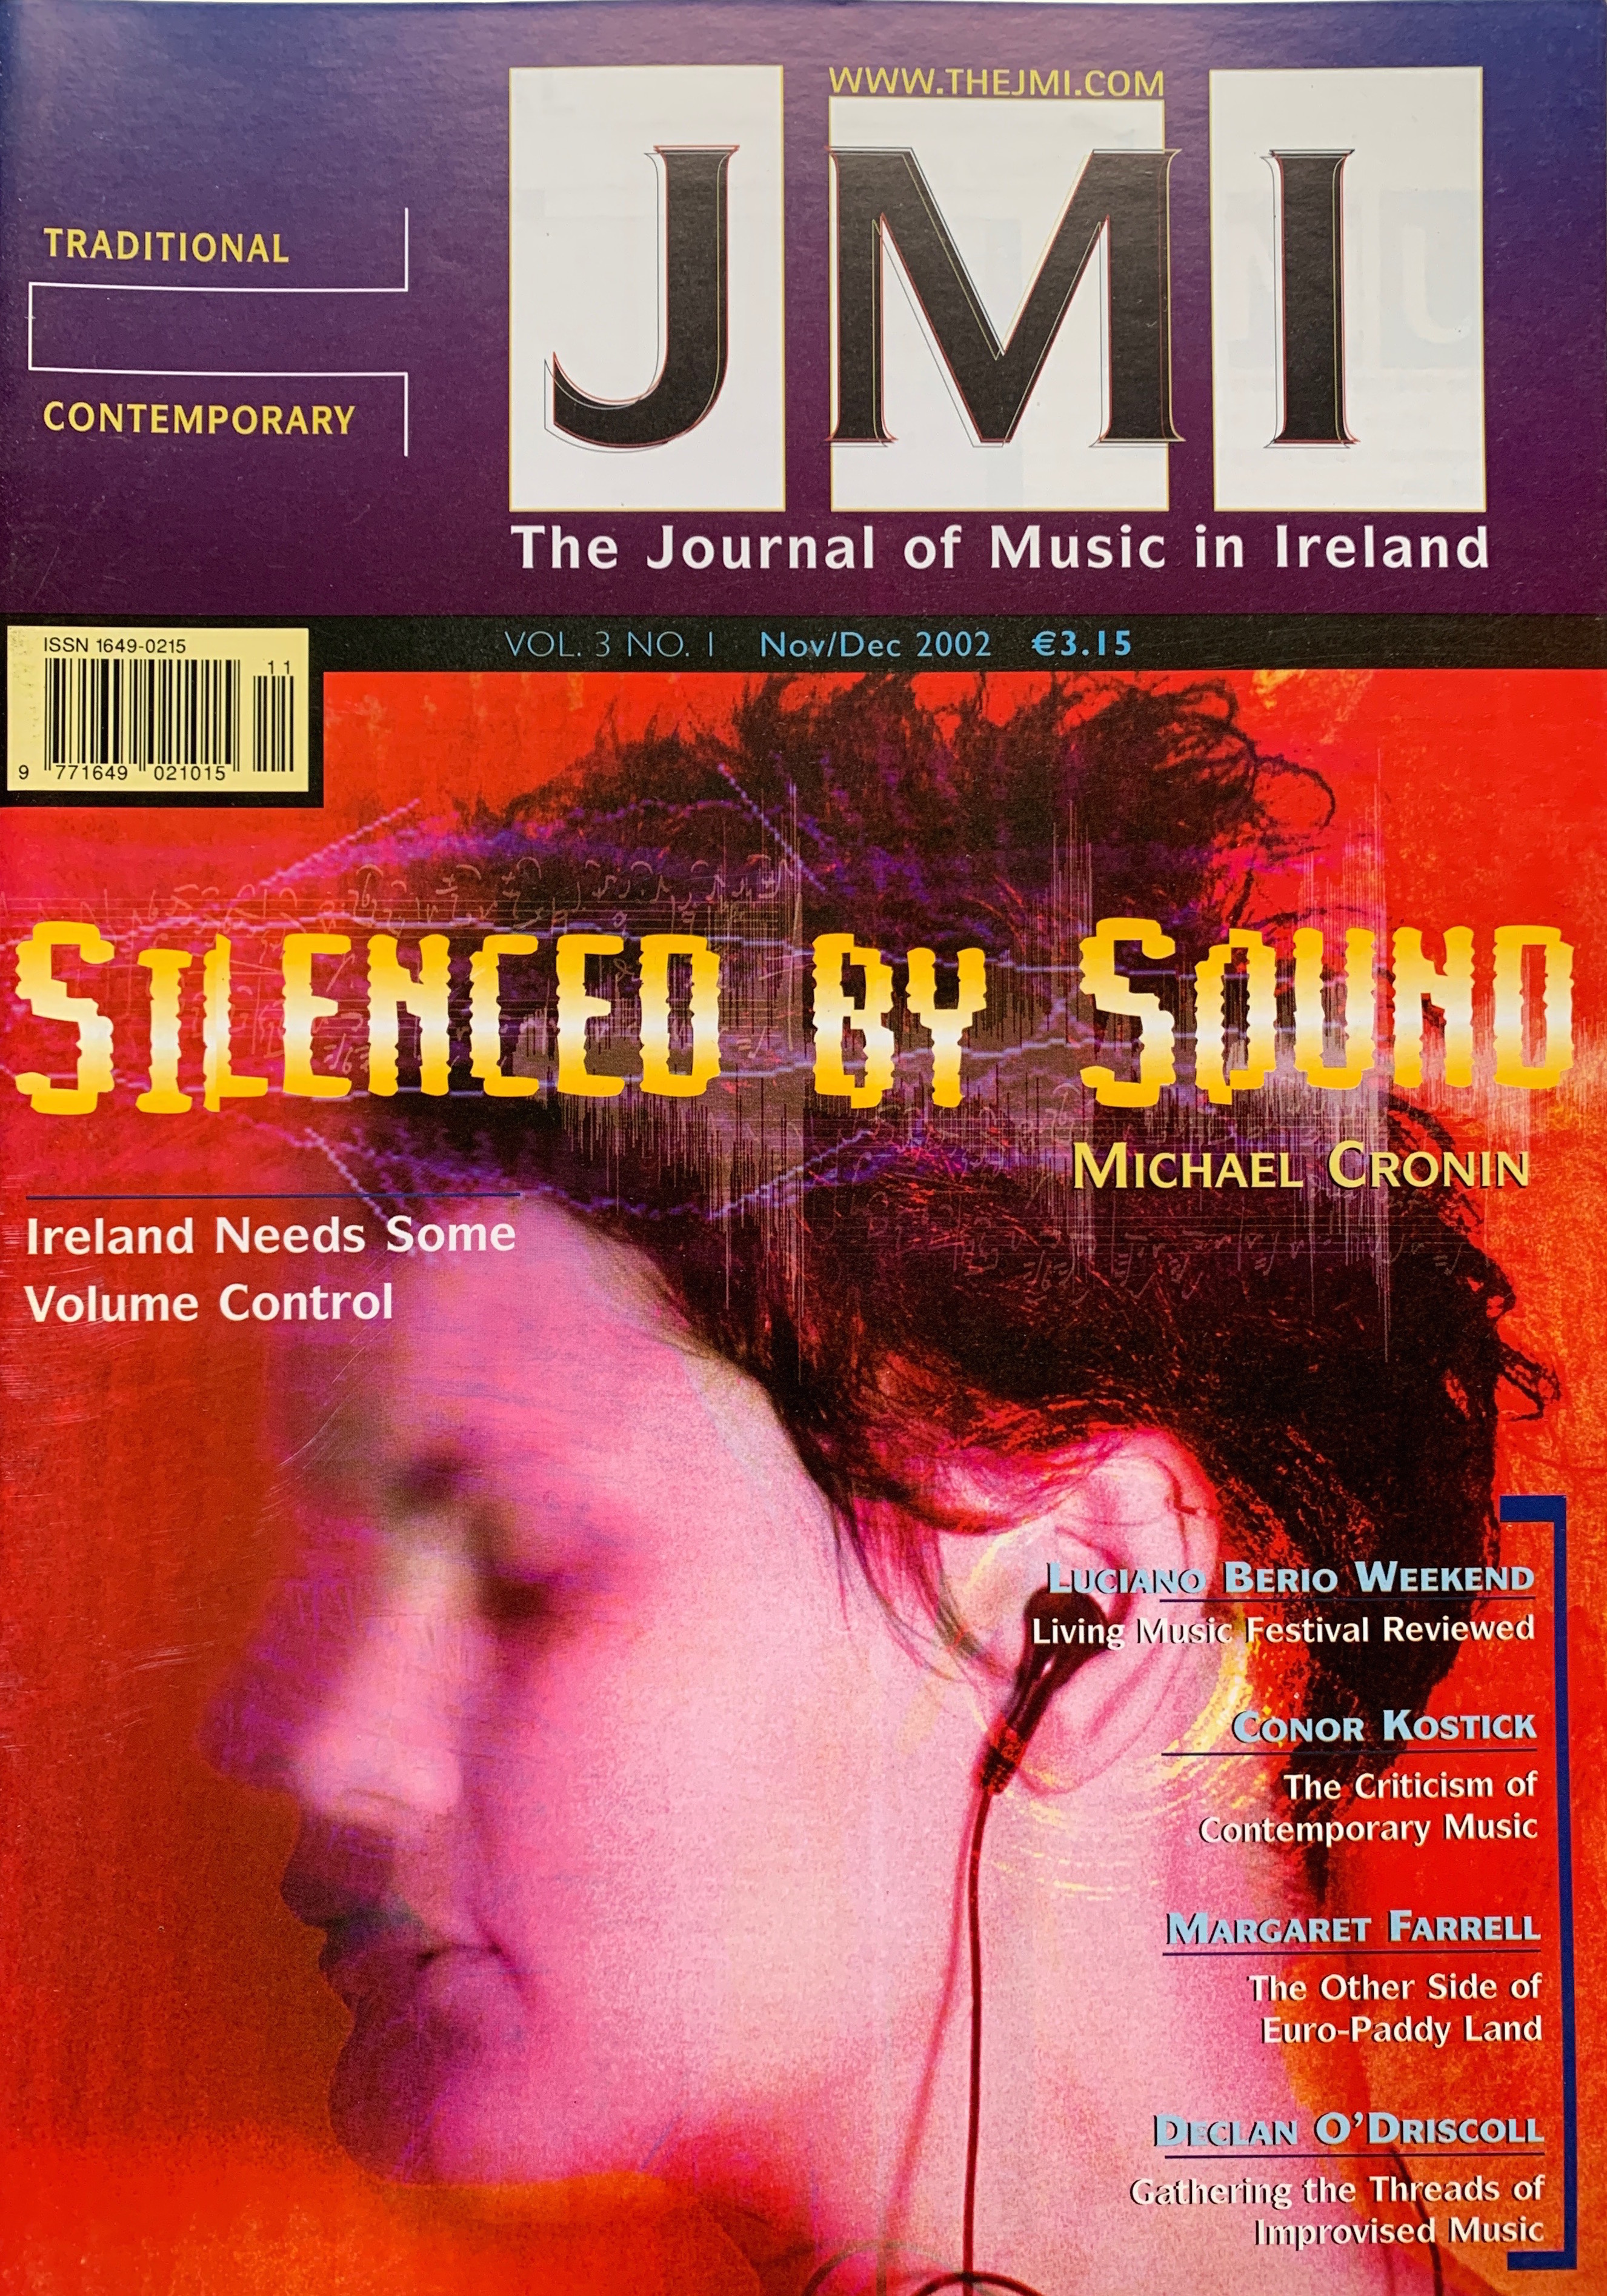 Silenced by Sound